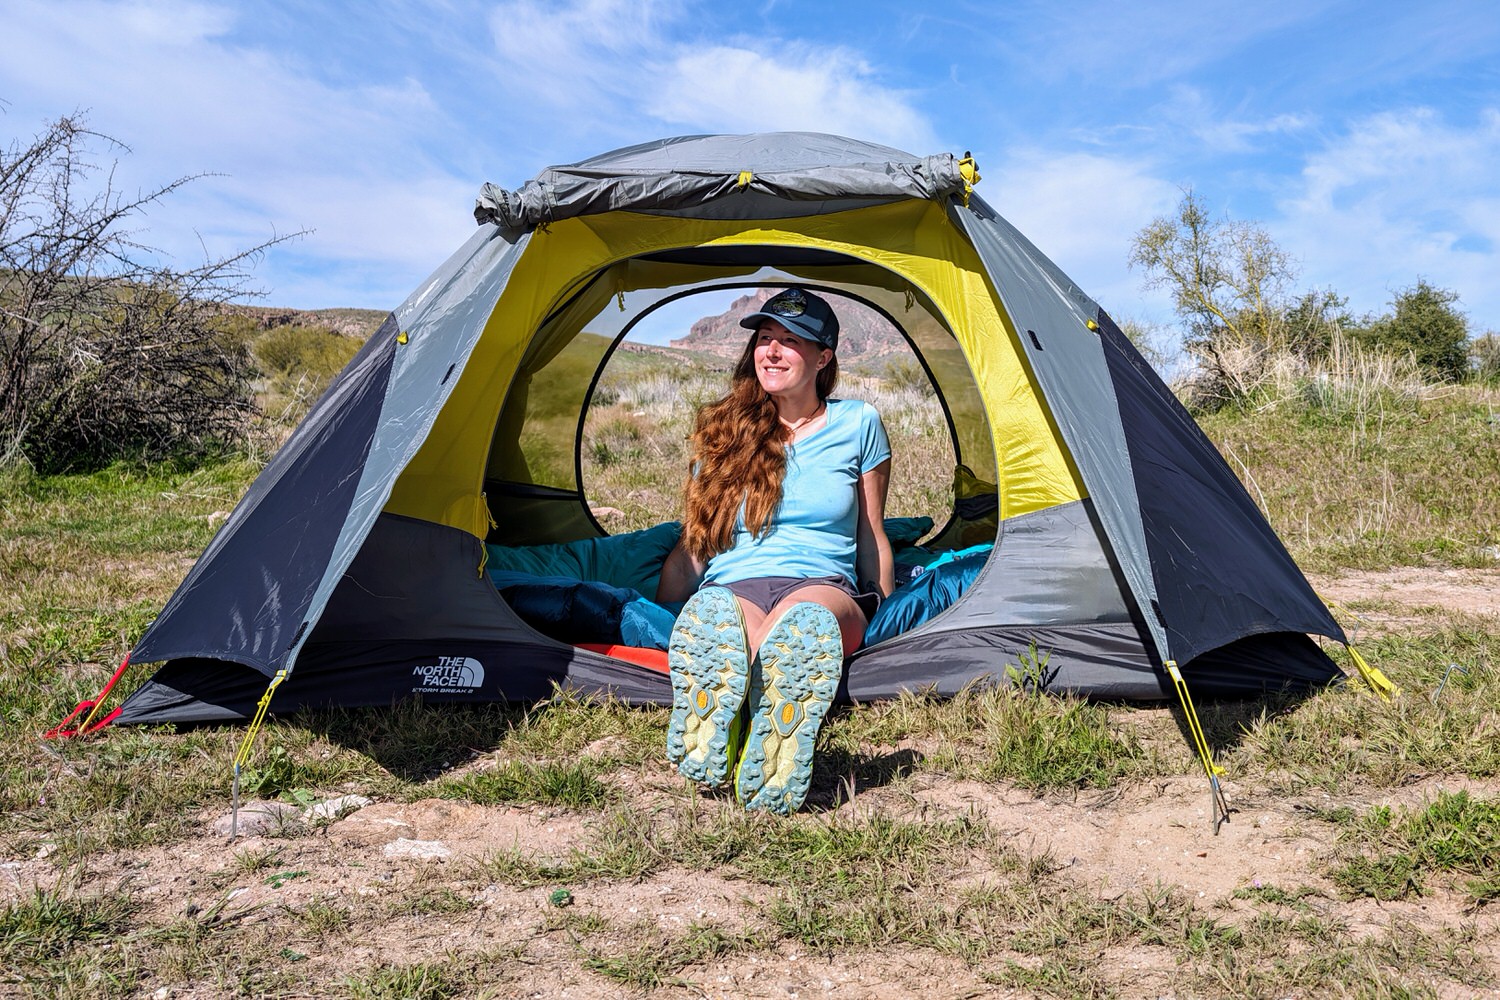 A hiker sitting in the doorway of The North Face Stormbreak 2 tent in a sunny Arizona campsite